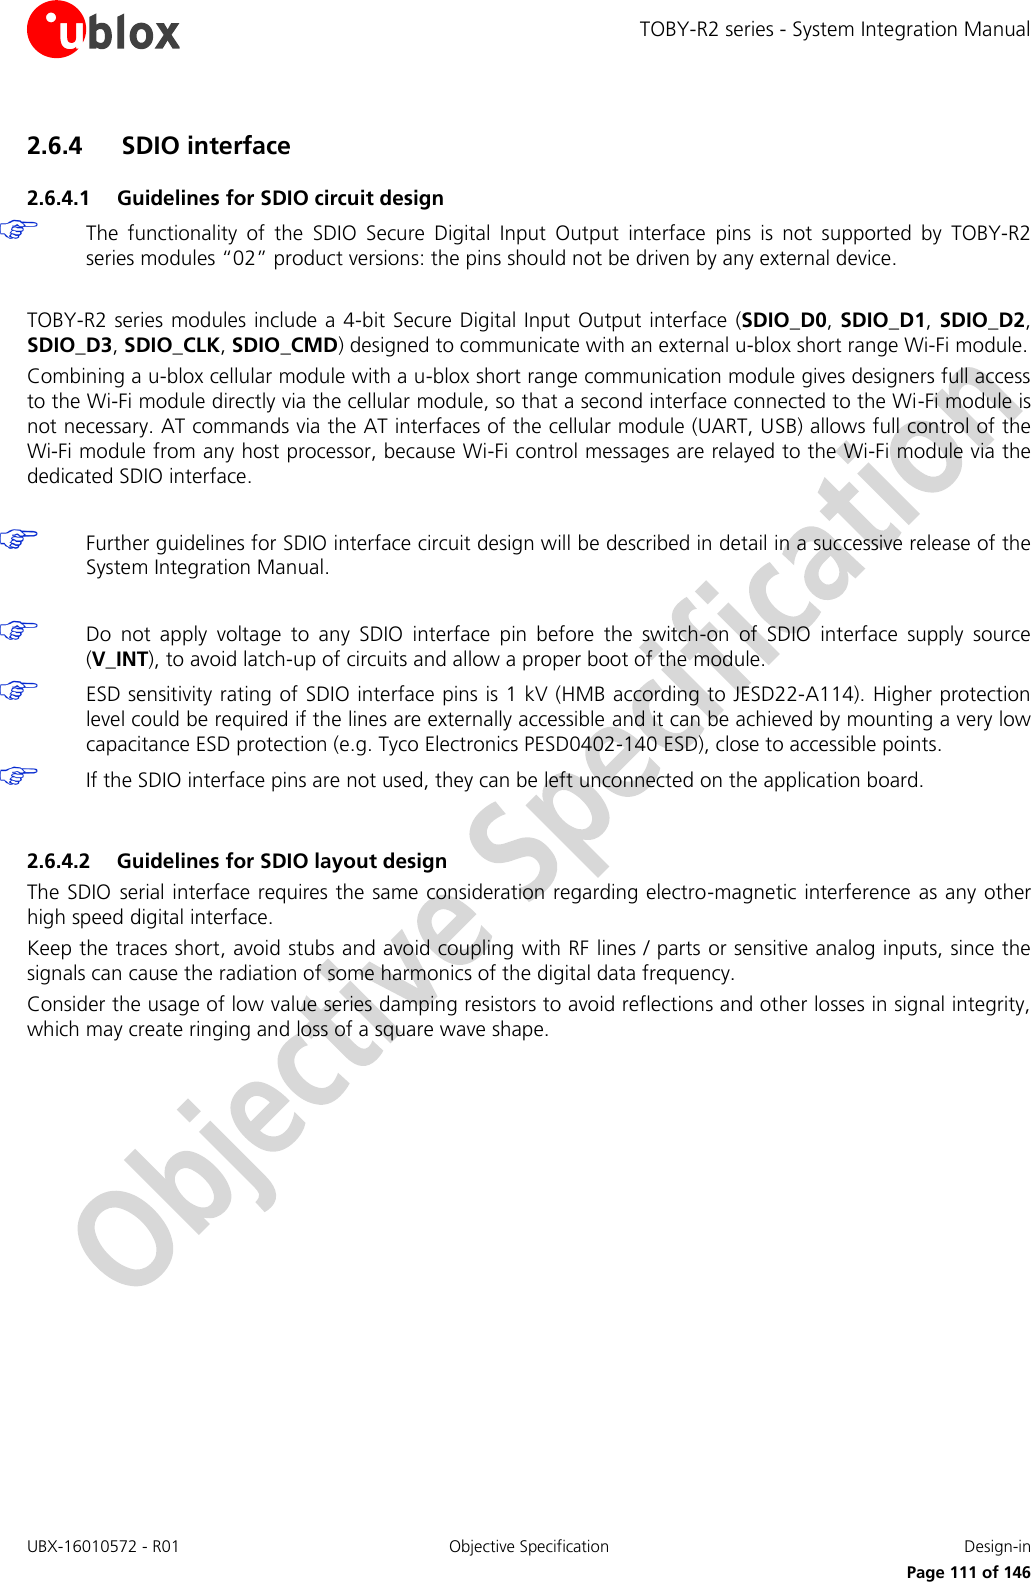 TOBY-R2 series - System Integration Manual UBX-16010572 - R01  Objective Specification  Design-in     Page 111 of 146 2.6.4 SDIO interface 2.6.4.1 Guidelines for SDIO circuit design  The  functionality  of  the  SDIO  Secure  Digital  Input  Output  interface  pins  is  not  supported  by  TOBY-R2 series modules “02” product versions: the pins should not be driven by any external device.   TOBY-R2 series modules include a 4-bit Secure Digital Input Output interface (SDIO_D0, SDIO_D1,  SDIO_D2, SDIO_D3, SDIO_CLK, SDIO_CMD) designed to communicate with an external u-blox short range Wi-Fi module. Combining a u-blox cellular module with a u-blox short range communication module gives designers full access to the Wi-Fi module directly via the cellular module, so that a second interface connected to the Wi-Fi module is not necessary. AT commands via the AT interfaces of the cellular module (UART, USB) allows full control of the Wi-Fi module from any host processor, because Wi-Fi control messages are relayed to the Wi-Fi module via the dedicated SDIO interface.   Further guidelines for SDIO interface circuit design will be described in detail in a successive release of the System Integration Manual.   Do  not  apply  voltage  to  any  SDIO  interface  pin  before  the  switch-on  of  SDIO  interface  supply  source (V_INT), to avoid latch-up of circuits and allow a proper boot of the module.  ESD sensitivity rating of SDIO interface pins is 1 kV (HMB according to JESD22-A114). Higher protection level could be required if the lines are externally accessible and it can be achieved by mounting a very low capacitance ESD protection (e.g. Tyco Electronics PESD0402-140 ESD), close to accessible points.  If the SDIO interface pins are not used, they can be left unconnected on the application board.  2.6.4.2 Guidelines for SDIO layout design The SDIO serial interface requires the same consideration regarding electro-magnetic interference as any other high speed digital interface. Keep the traces short, avoid stubs and avoid coupling with RF lines / parts or sensitive analog inputs, since the signals can cause the radiation of some harmonics of the digital data frequency. Consider the usage of low value series damping resistors to avoid reflections and other losses in signal integrity, which may create ringing and loss of a square wave shape.  